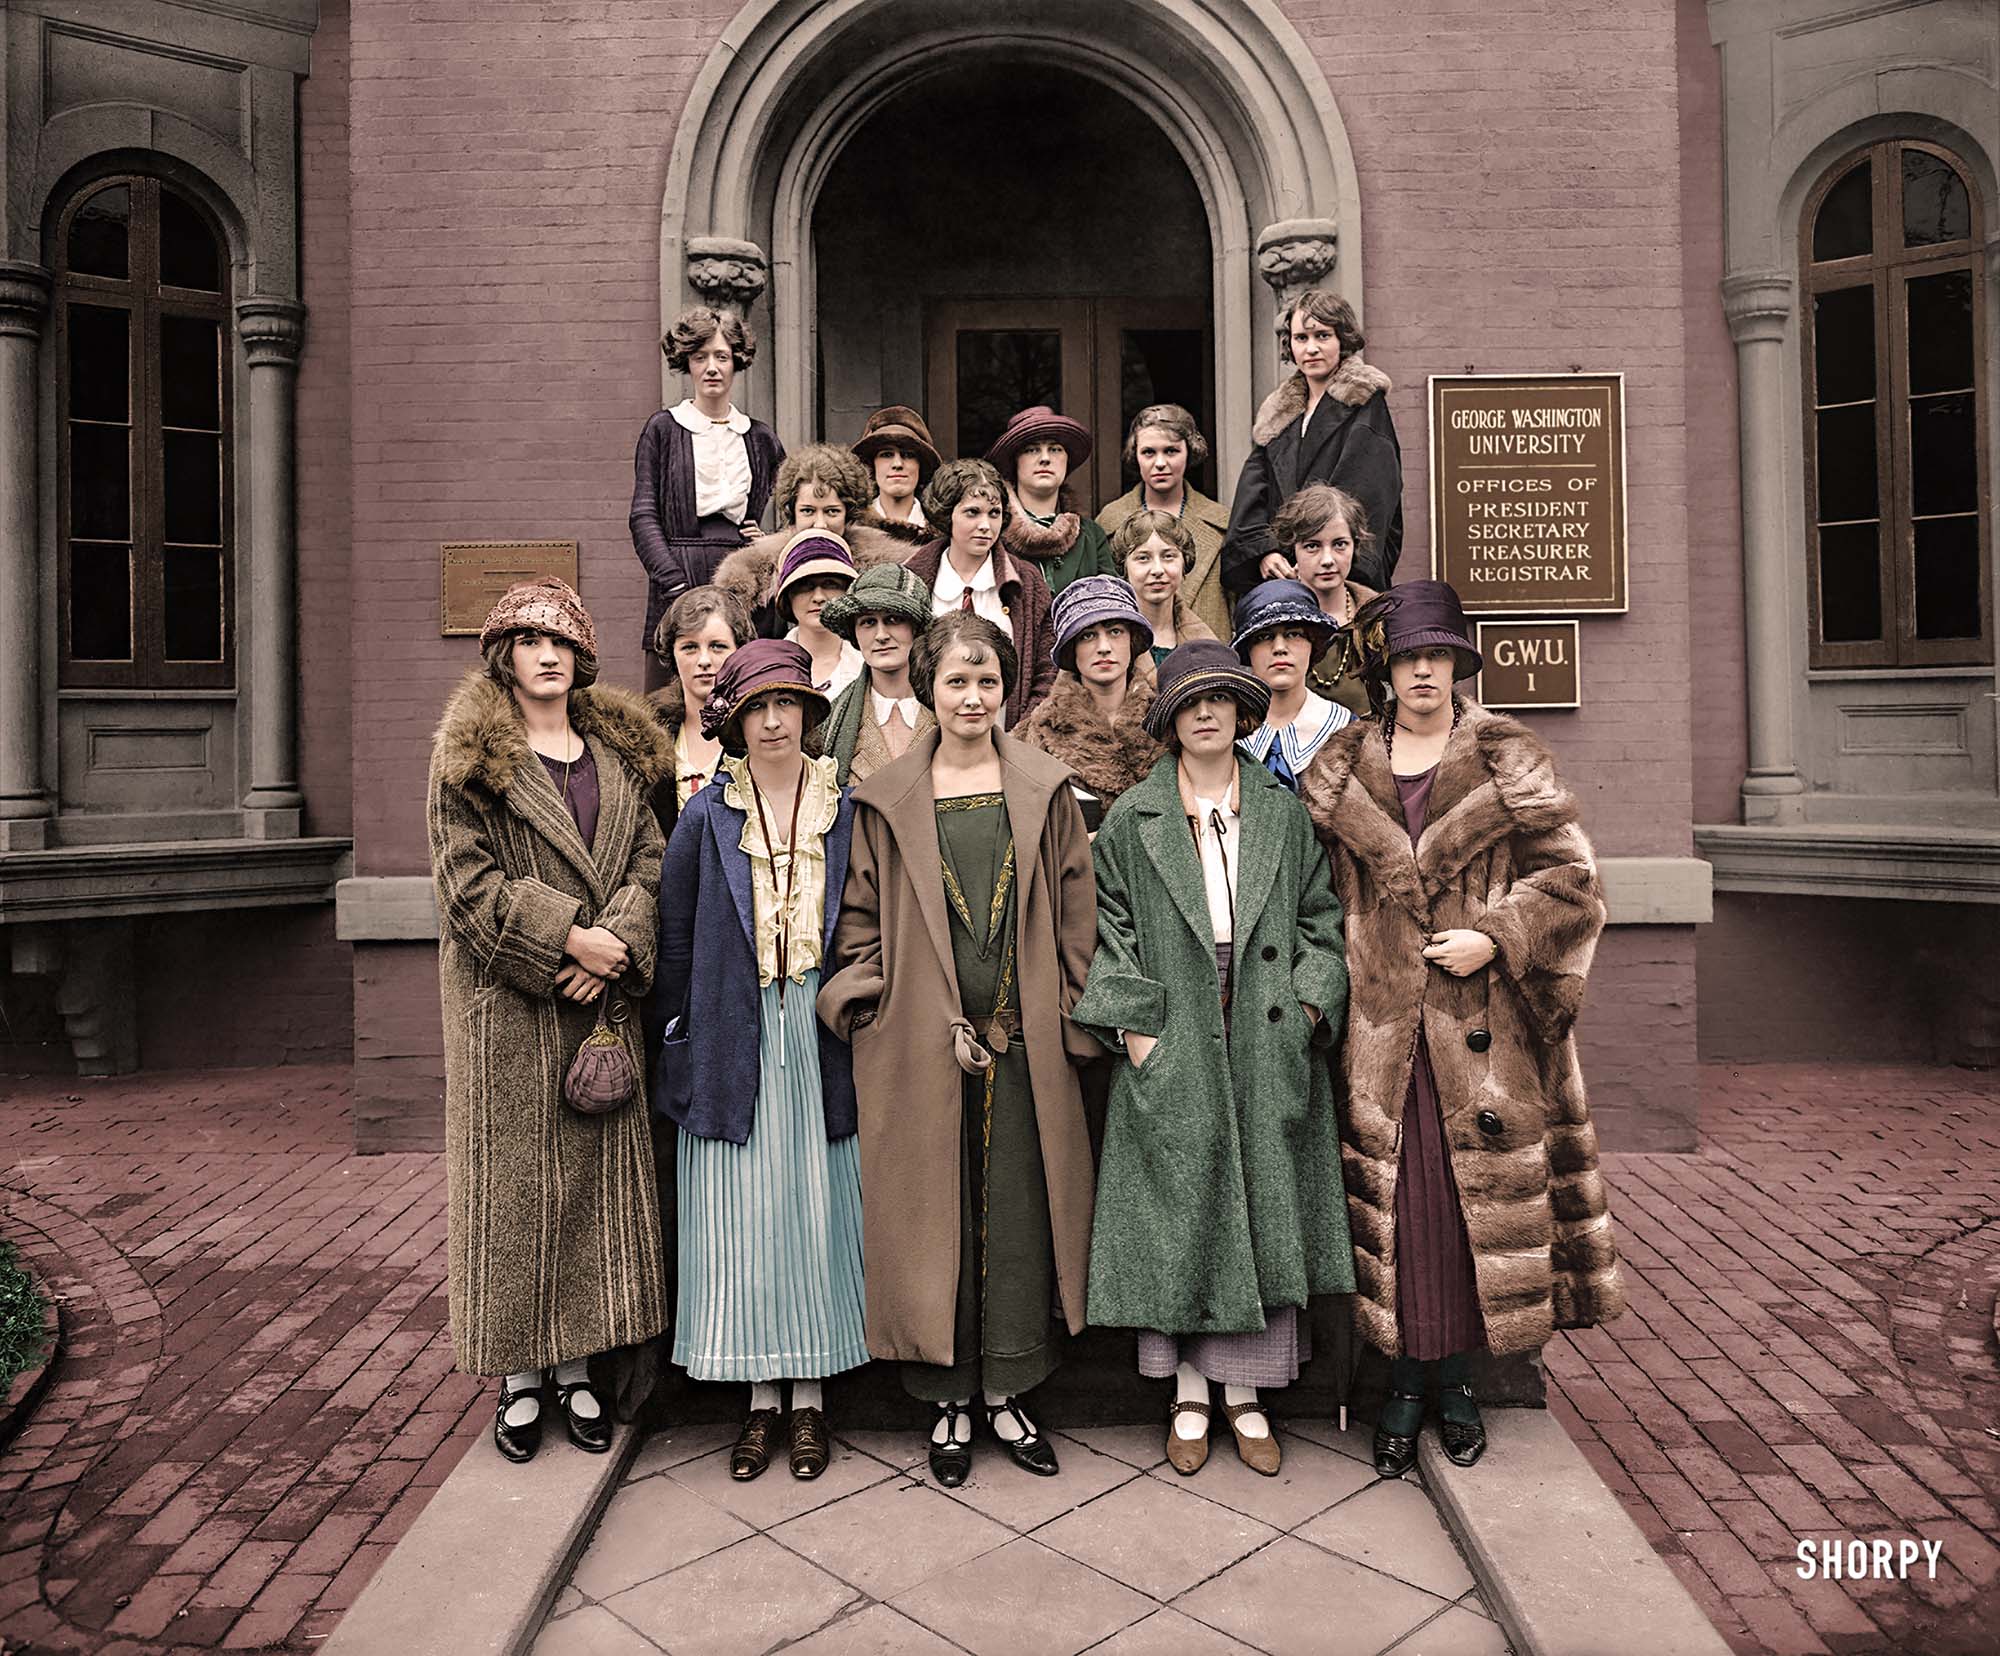 Here is my version of this Shorpy photo. Highly educated women, at a time when not many women could go to college.